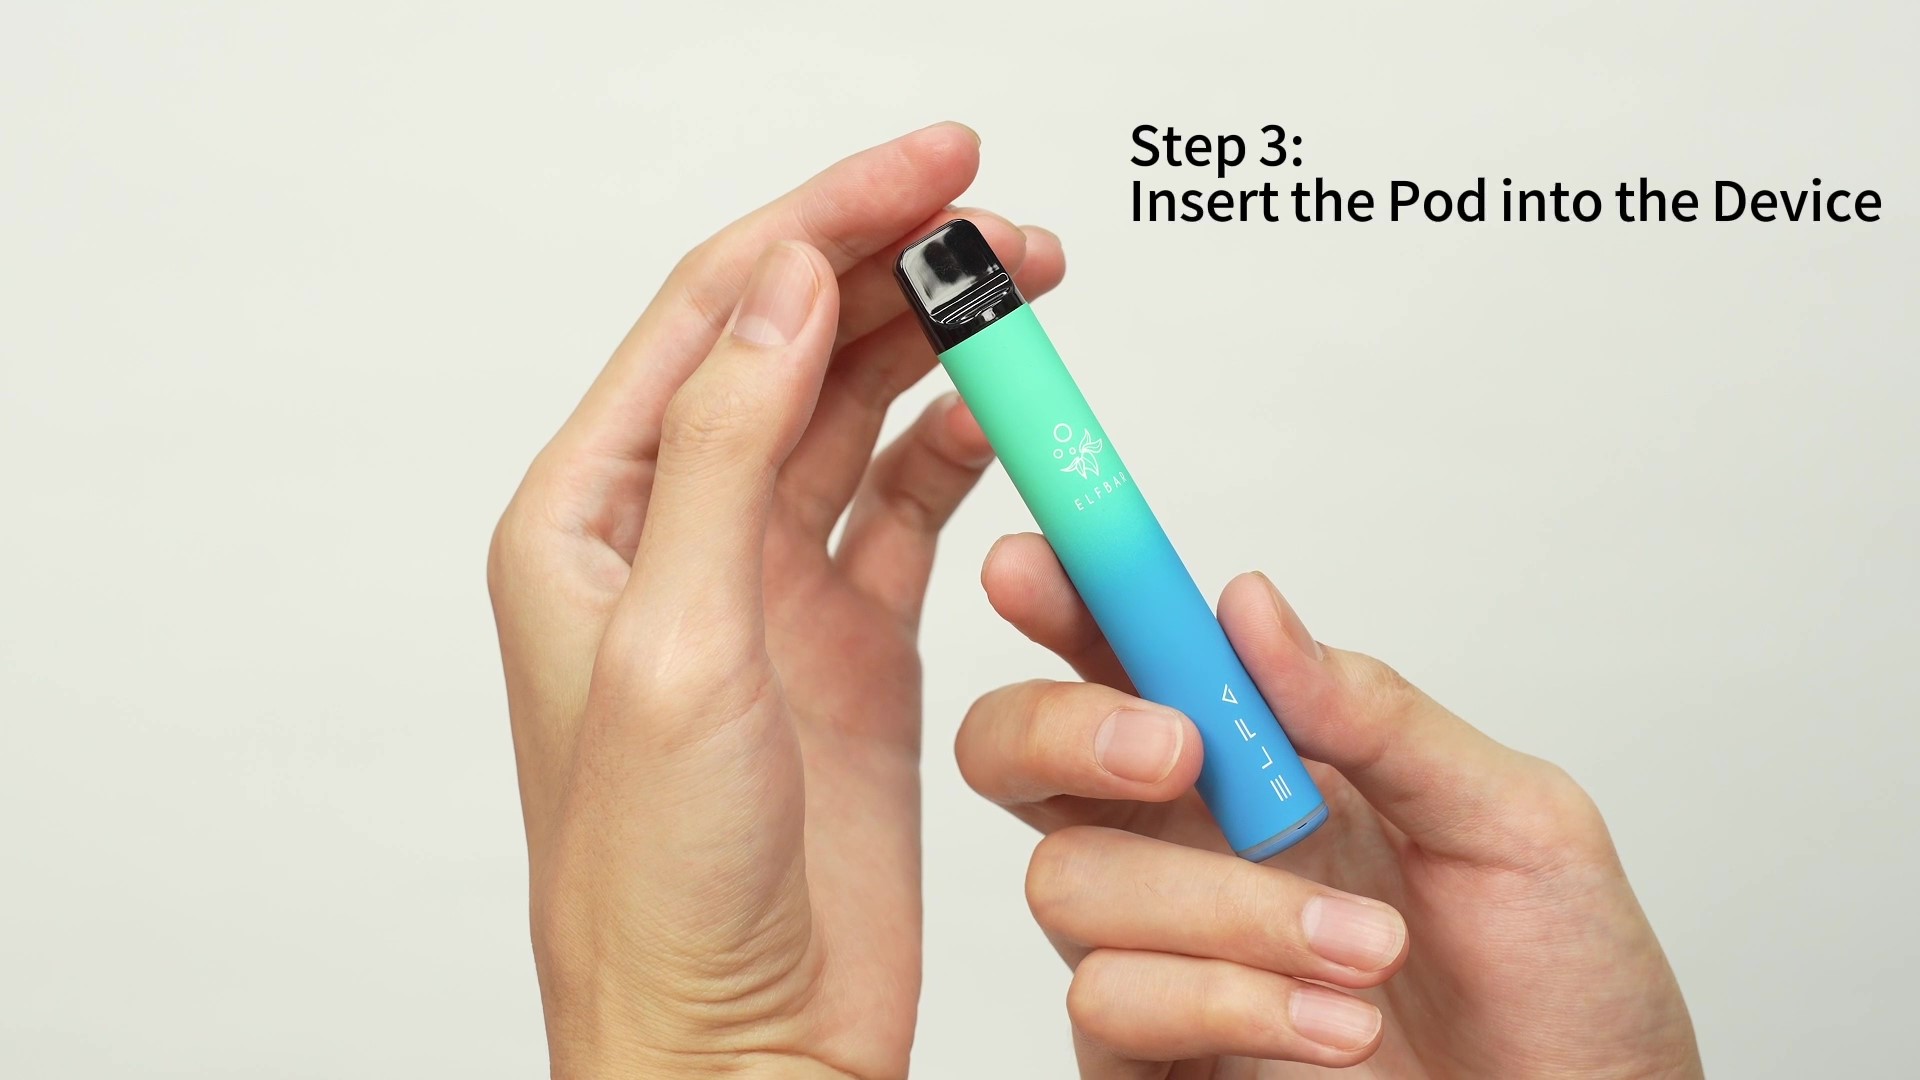 When the Elfa Pro pod is inserted you can start vaping